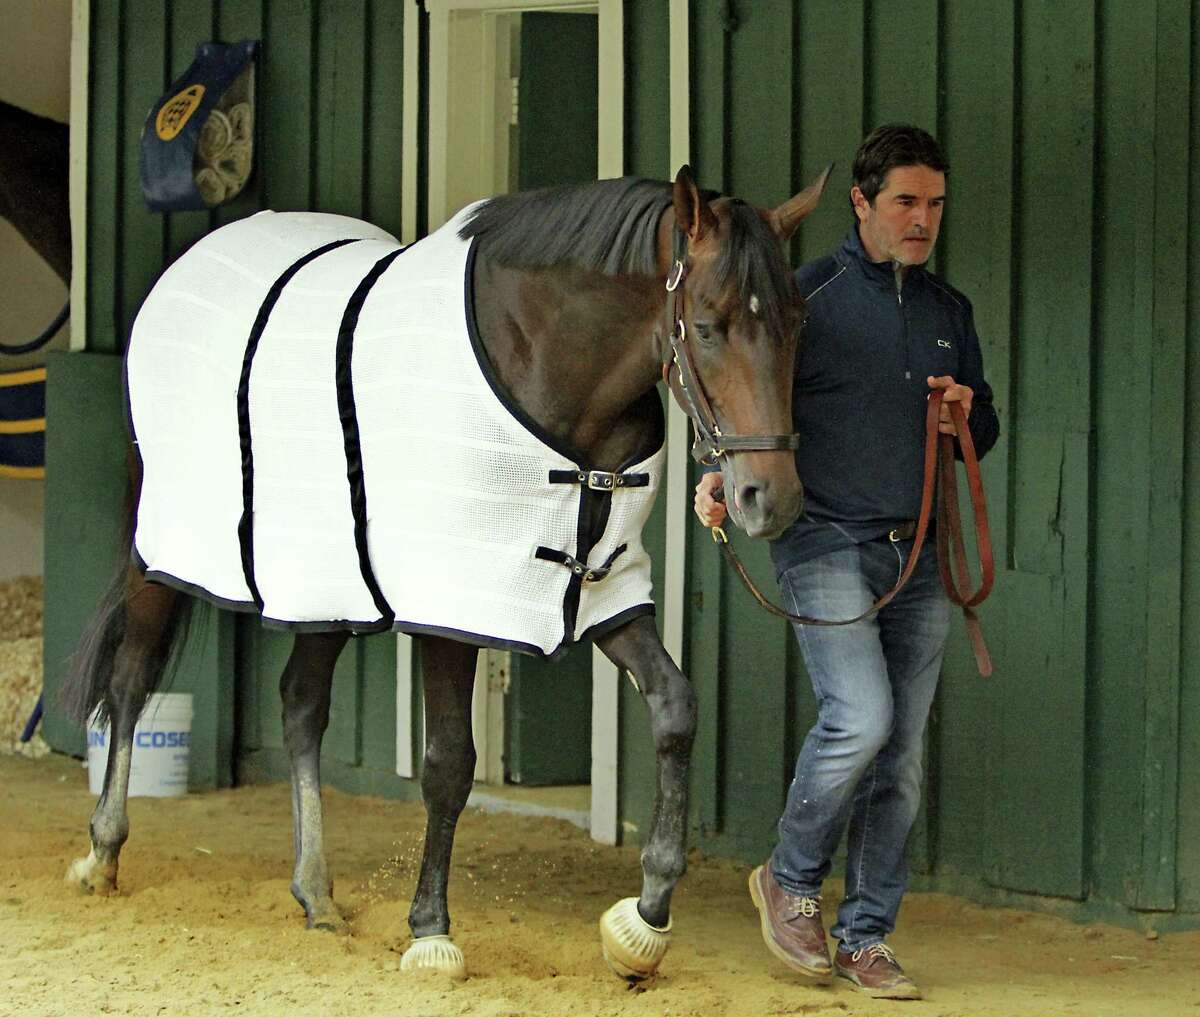 Trainer Keith Desormeaux walks Preakness Stakes hopeful Exaggerator in the stakes barn at Pimlico Race Course Wednesday in Baltimore following a morning jog.